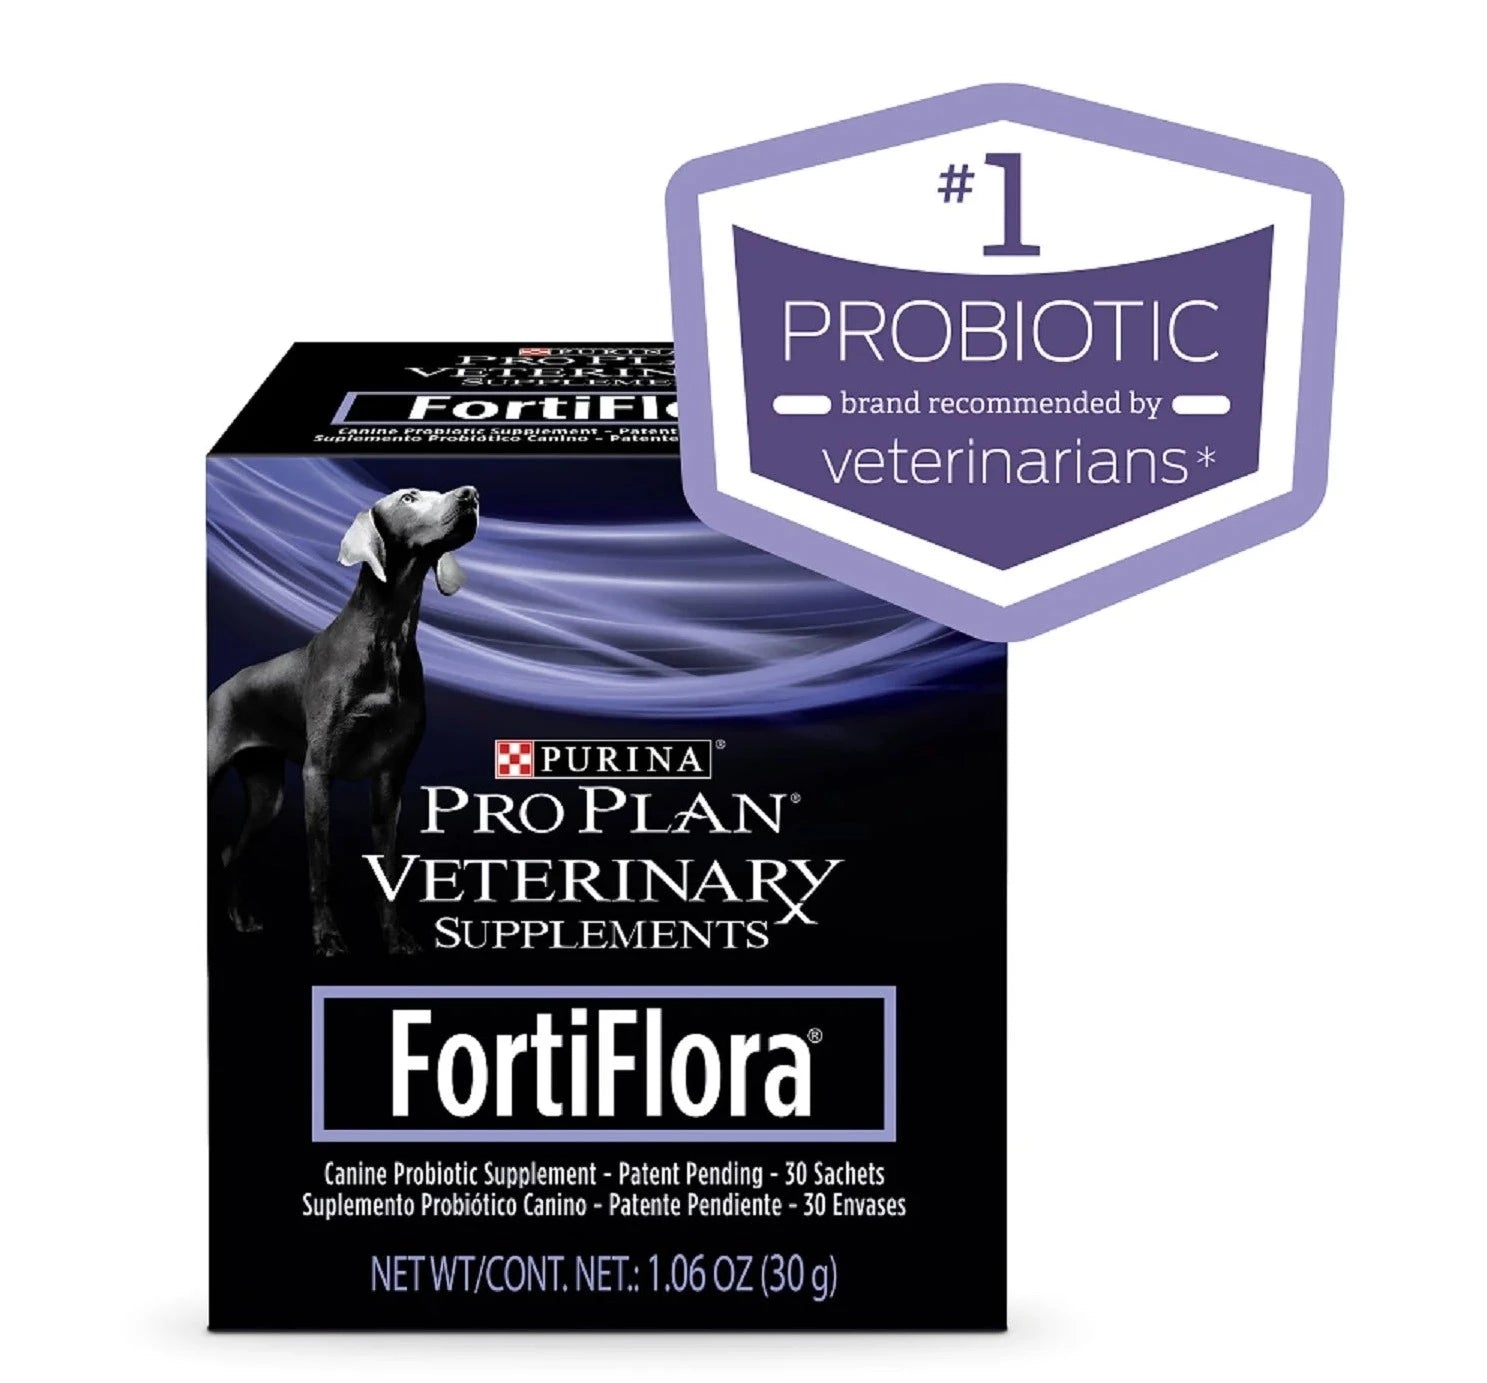 Purina | Pro Plan | FortiFlora Canine Probiotic Supplement | ARMOR THE POOCH